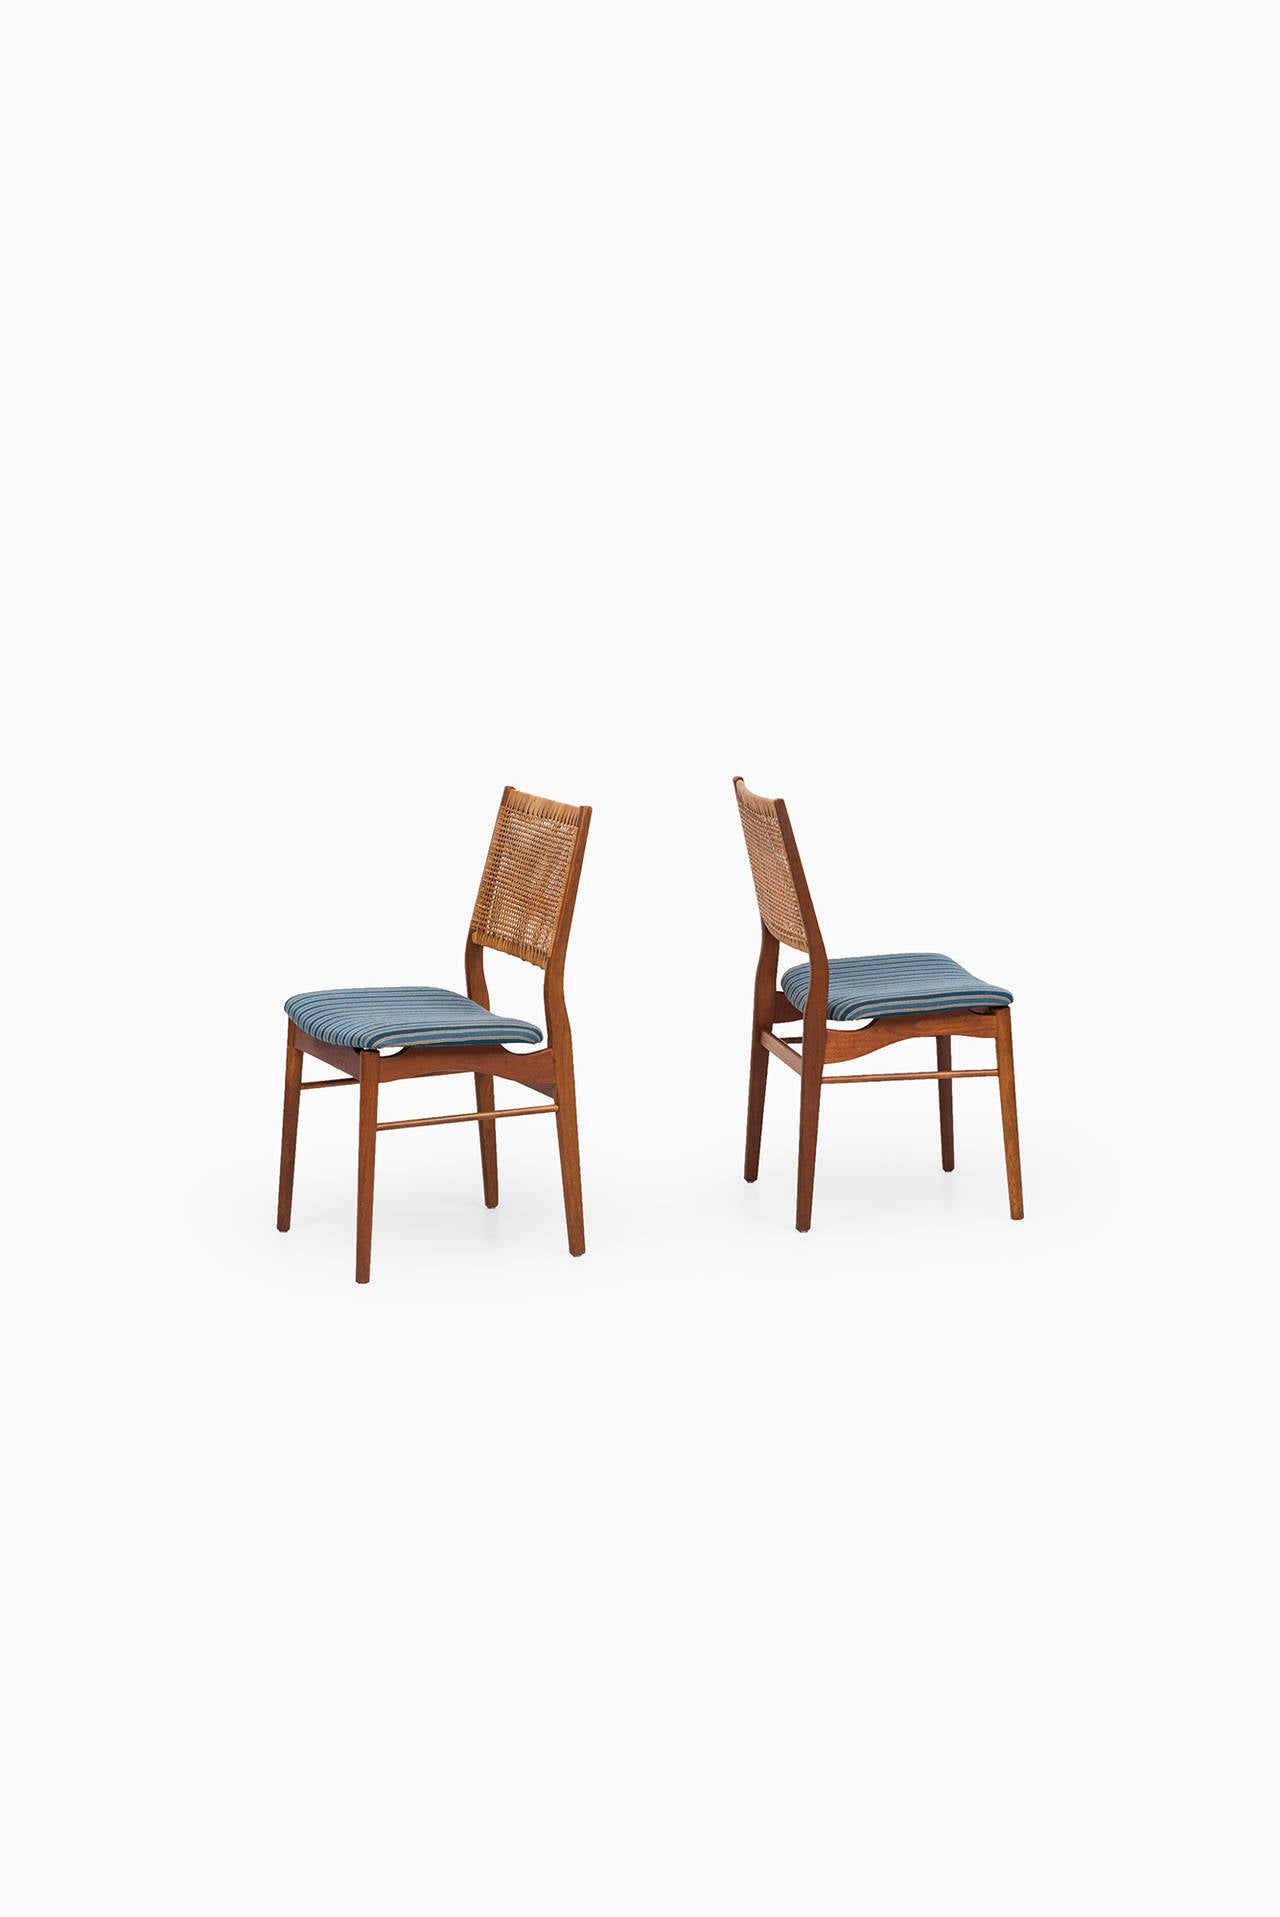 Danish Helge Sibast dining chairs model OS 2 by Sibast in Denmark